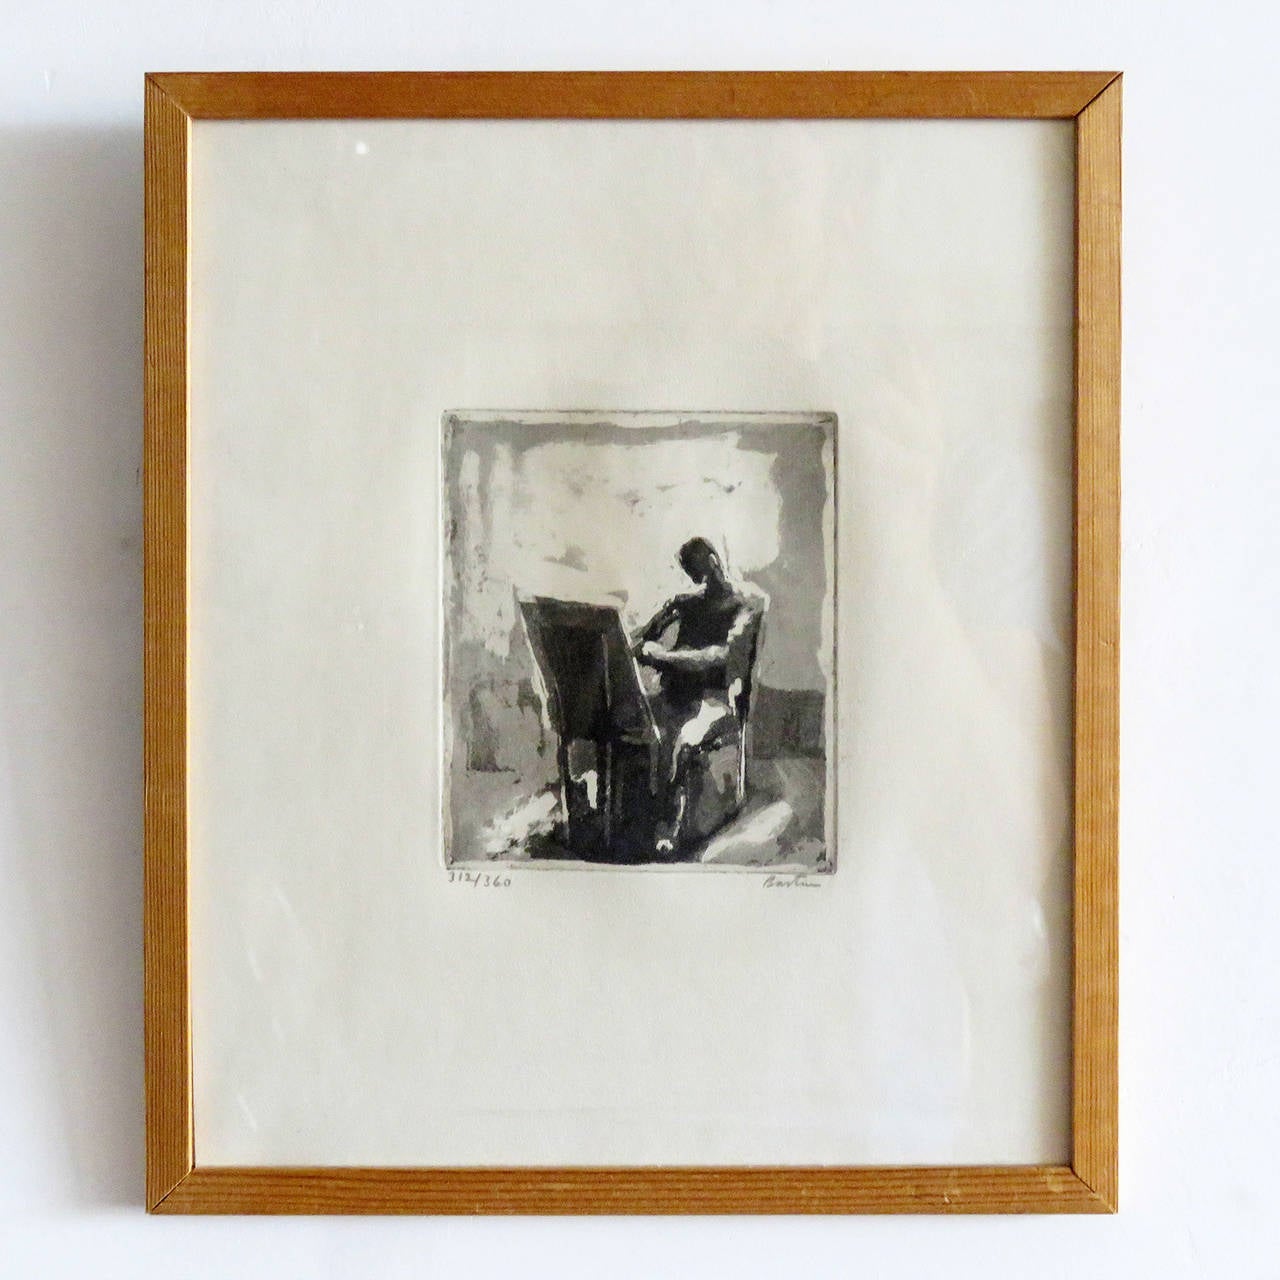 stunning set of six figural etchings 'Towards the Light' by Louis Bastin (1912-1979), limited edition, signed and numbered in pencil, Bastin 312/360, framed in wood behind glass, 14.5